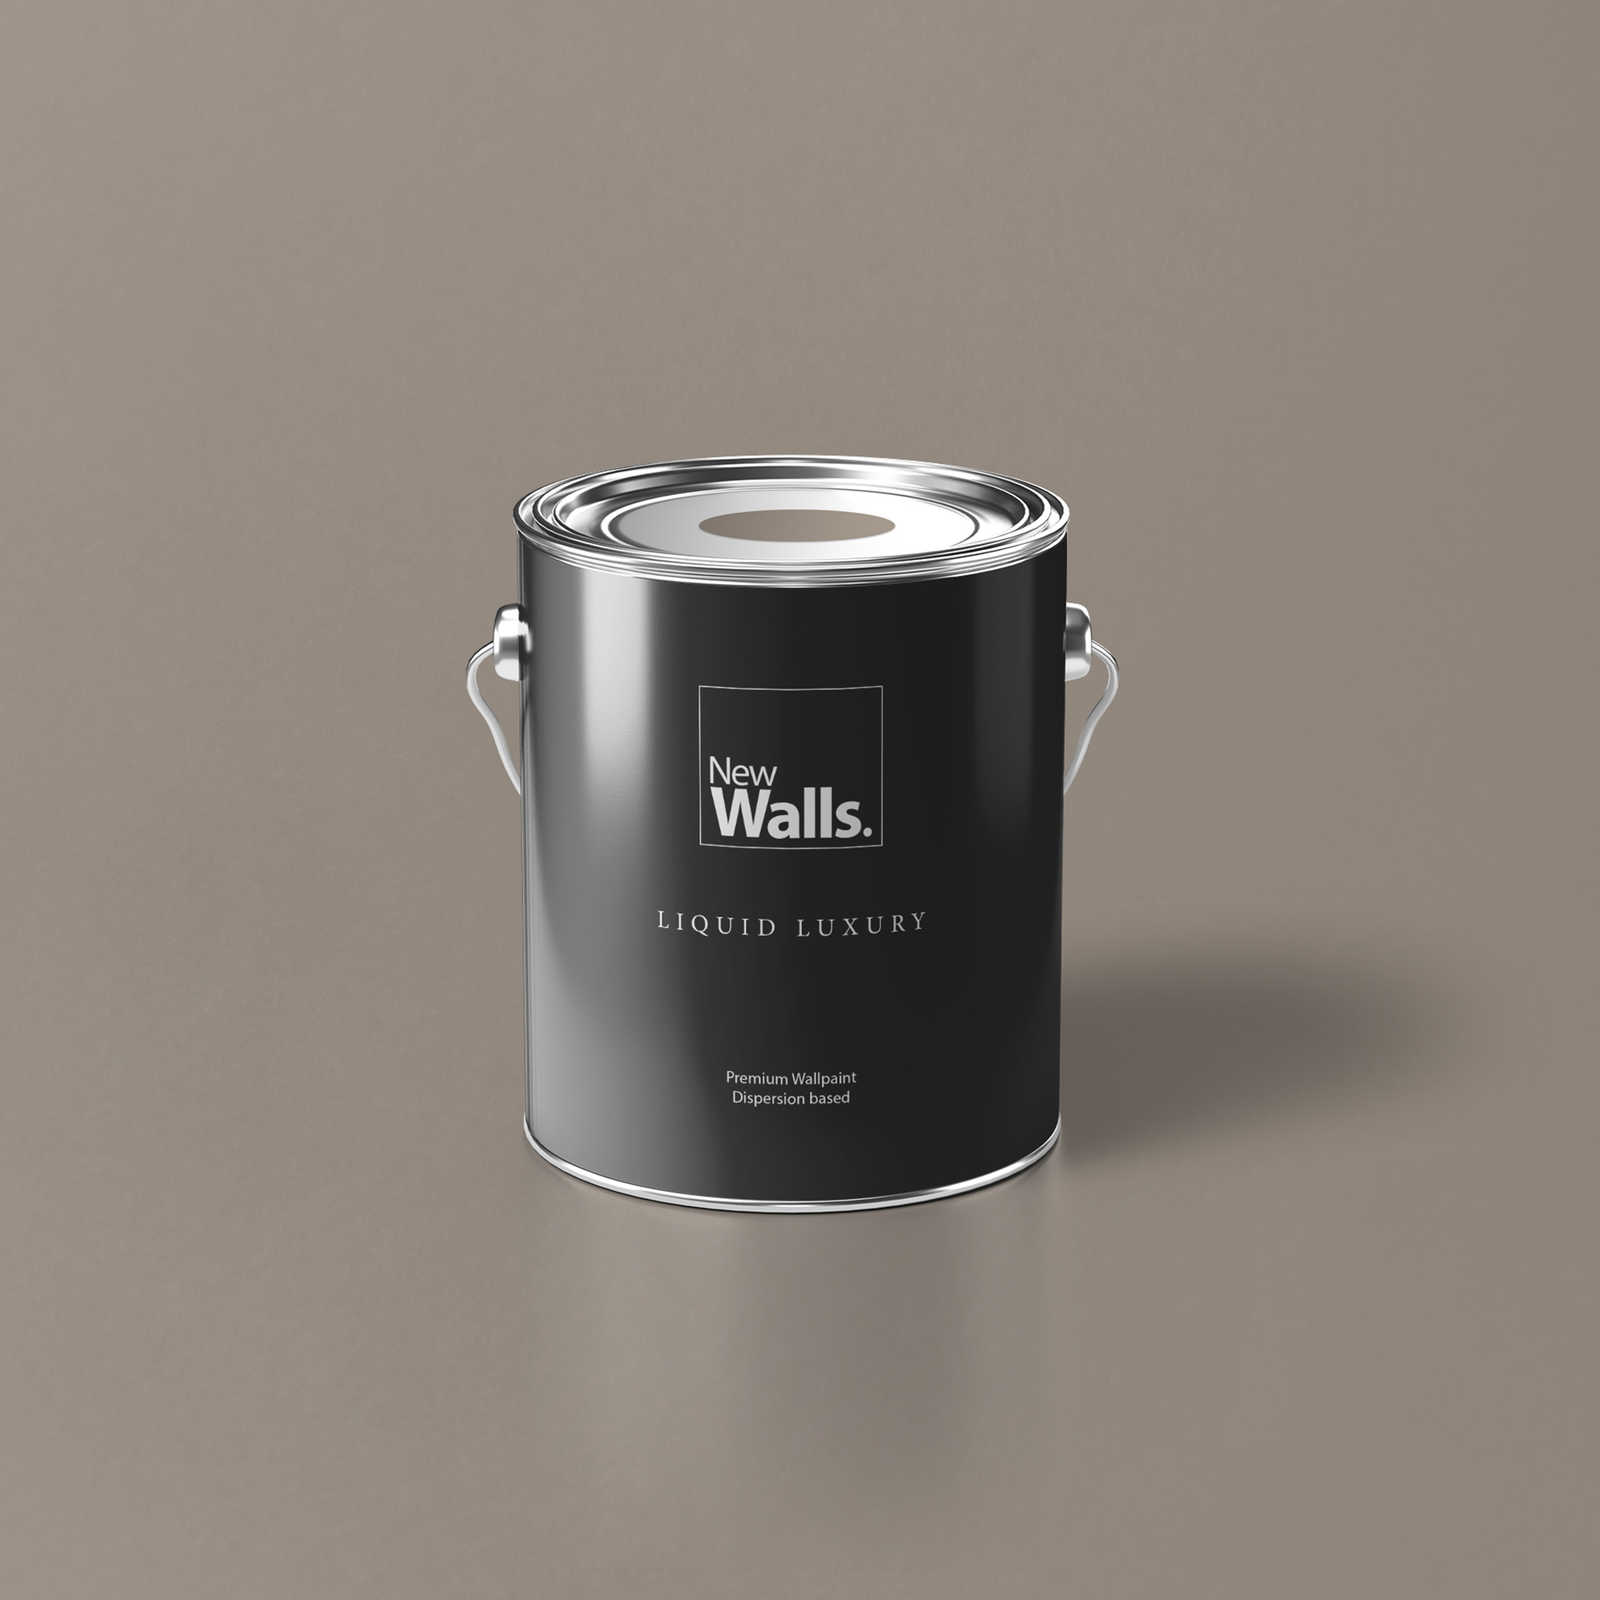 Premium Wall Paint Balanced Taupe »Talented calm taupe« NW701 – 2.5 litre
